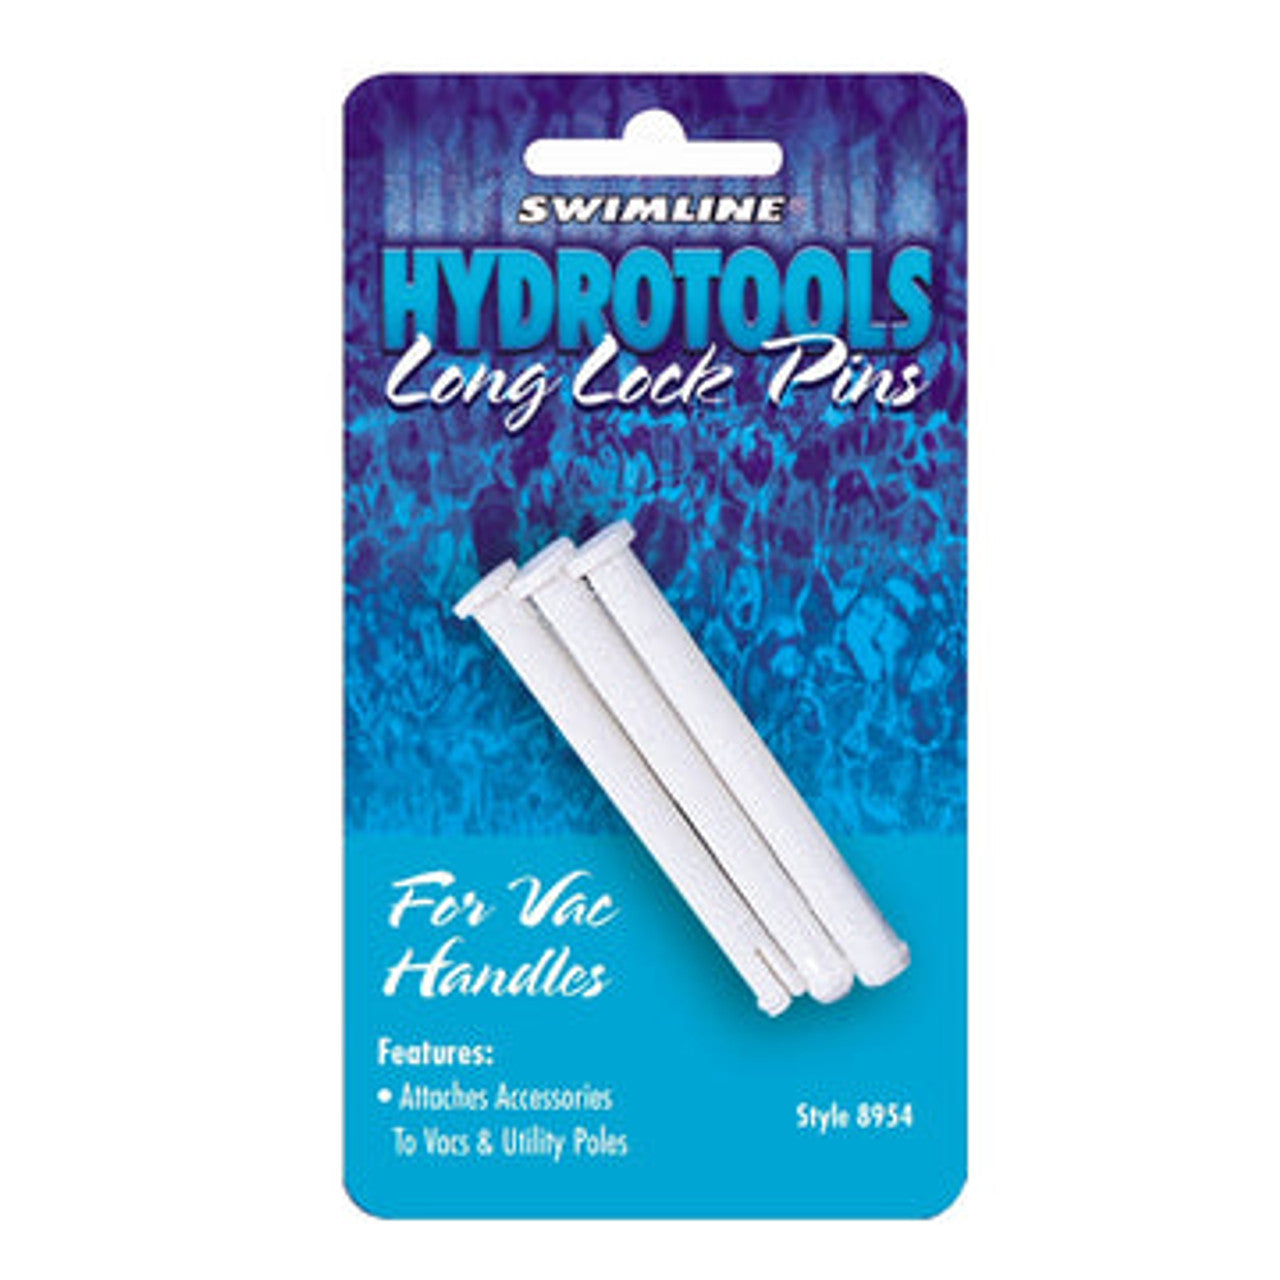 HydroTools 8954 Replacement Long Lock Pins 3-Pack